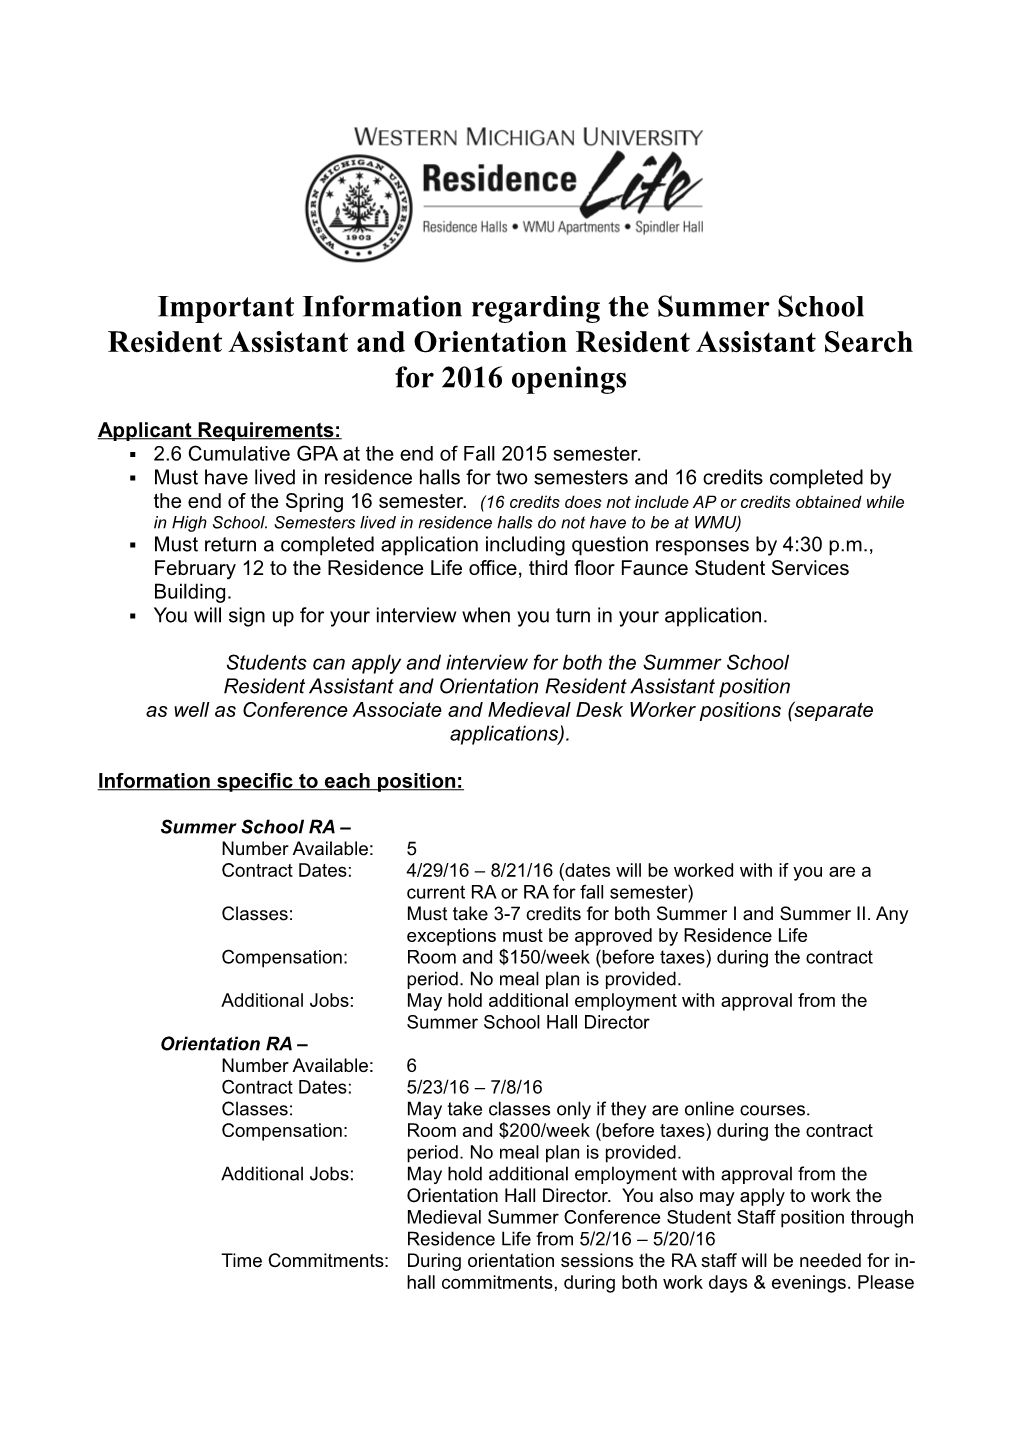 Important Information Regarding the Summer School Resident Assistant and Orientation Resident